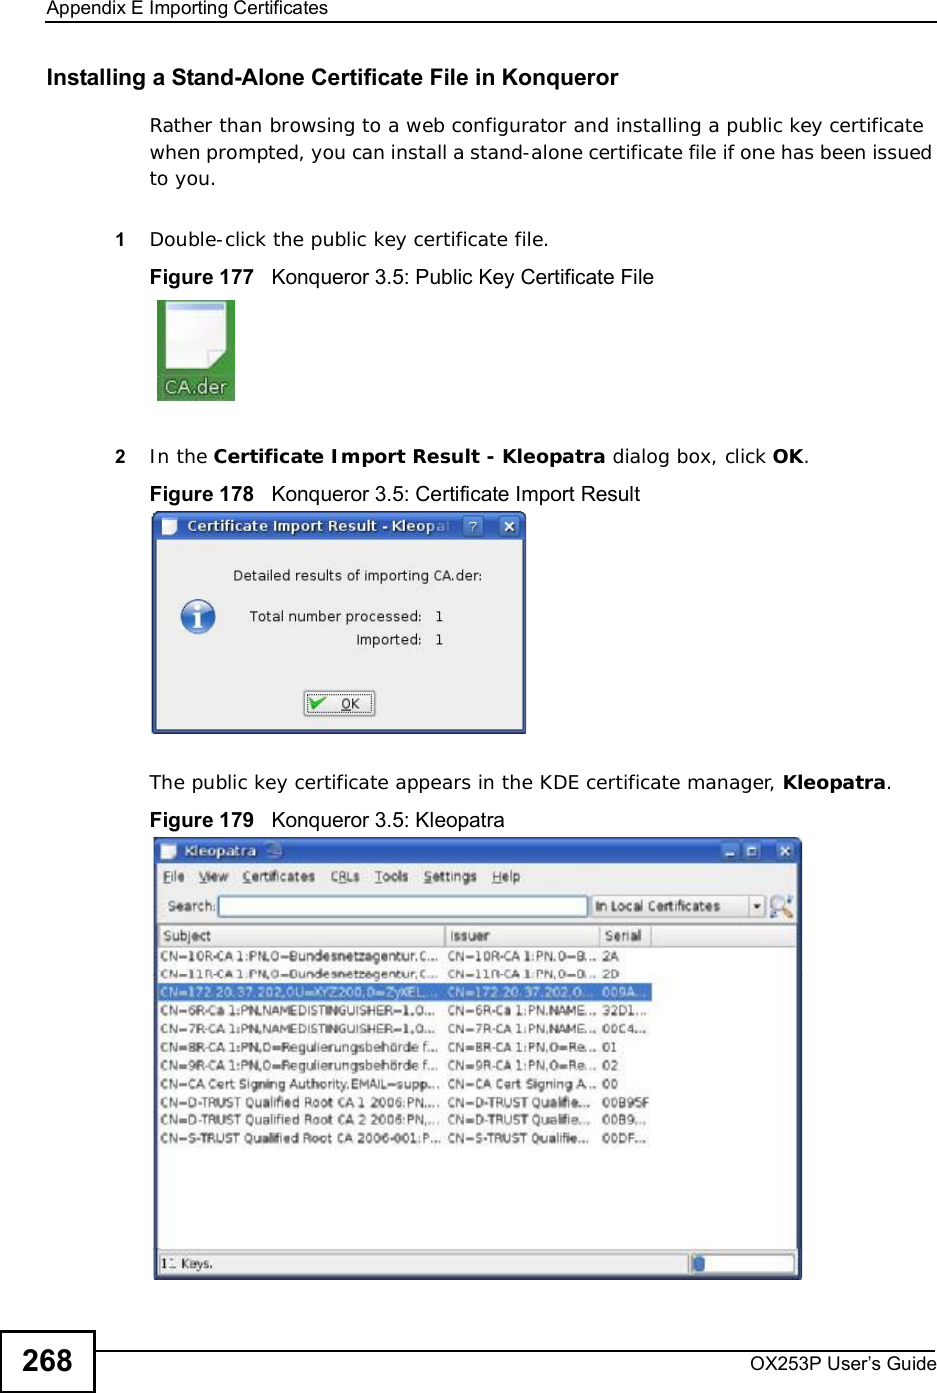 Appendix EImporting CertificatesOX253P User’s Guide268Installing a Stand-Alone Certificate File in KonquerorRather than browsing to a web configurator and installing a public key certificate when prompted, you can install a stand-alone certificate file if one has been issued to you.1Double-click the public key certificate file.Figure 177   Konqueror 3.5: Public Key Certificate File2In the Certificate Import Result - Kleopatra dialog box, click OK.Figure 178   Konqueror 3.5: Certificate Import ResultThe public key certificate appears in the KDE certificate manager, Kleopatra.Figure 179   Konqueror 3.5: Kleopatra